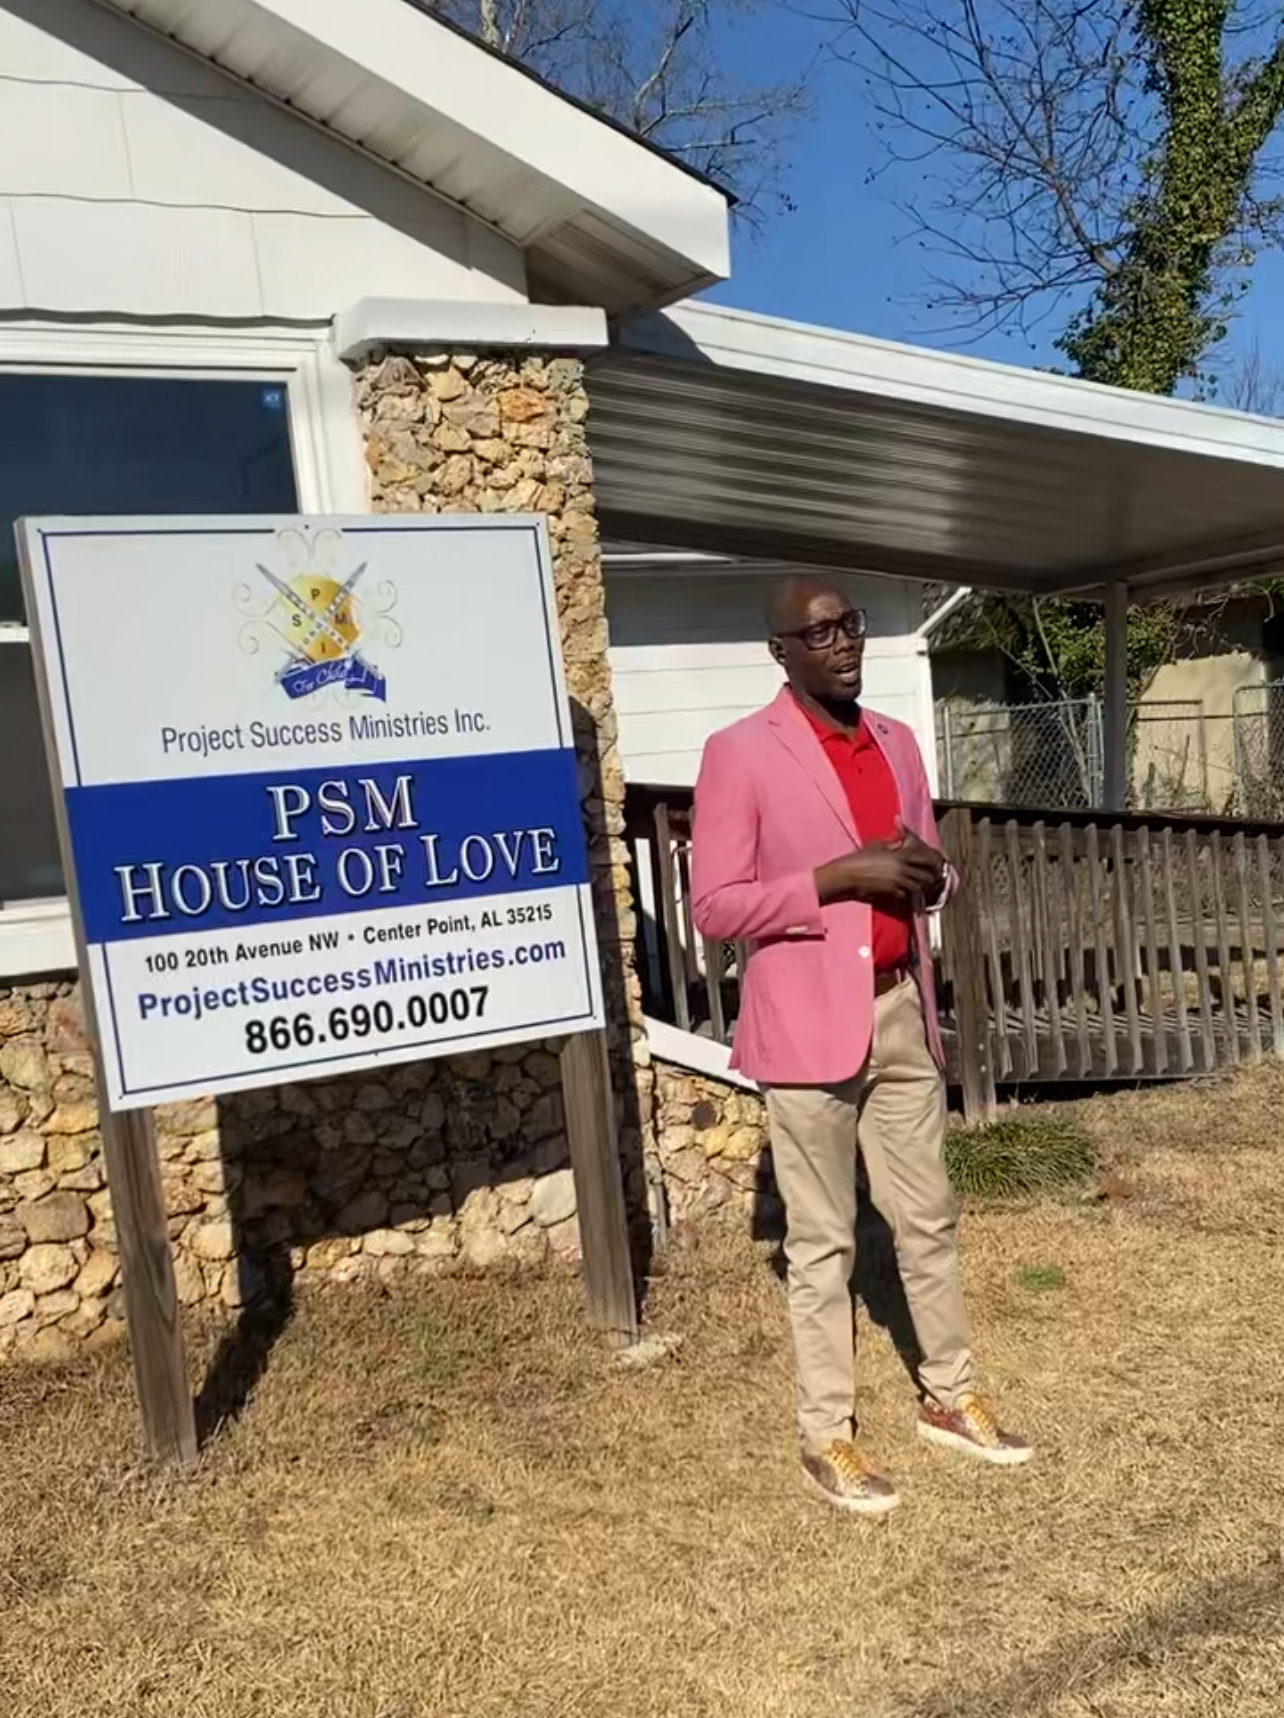 PSM House of Love opens in Center Point